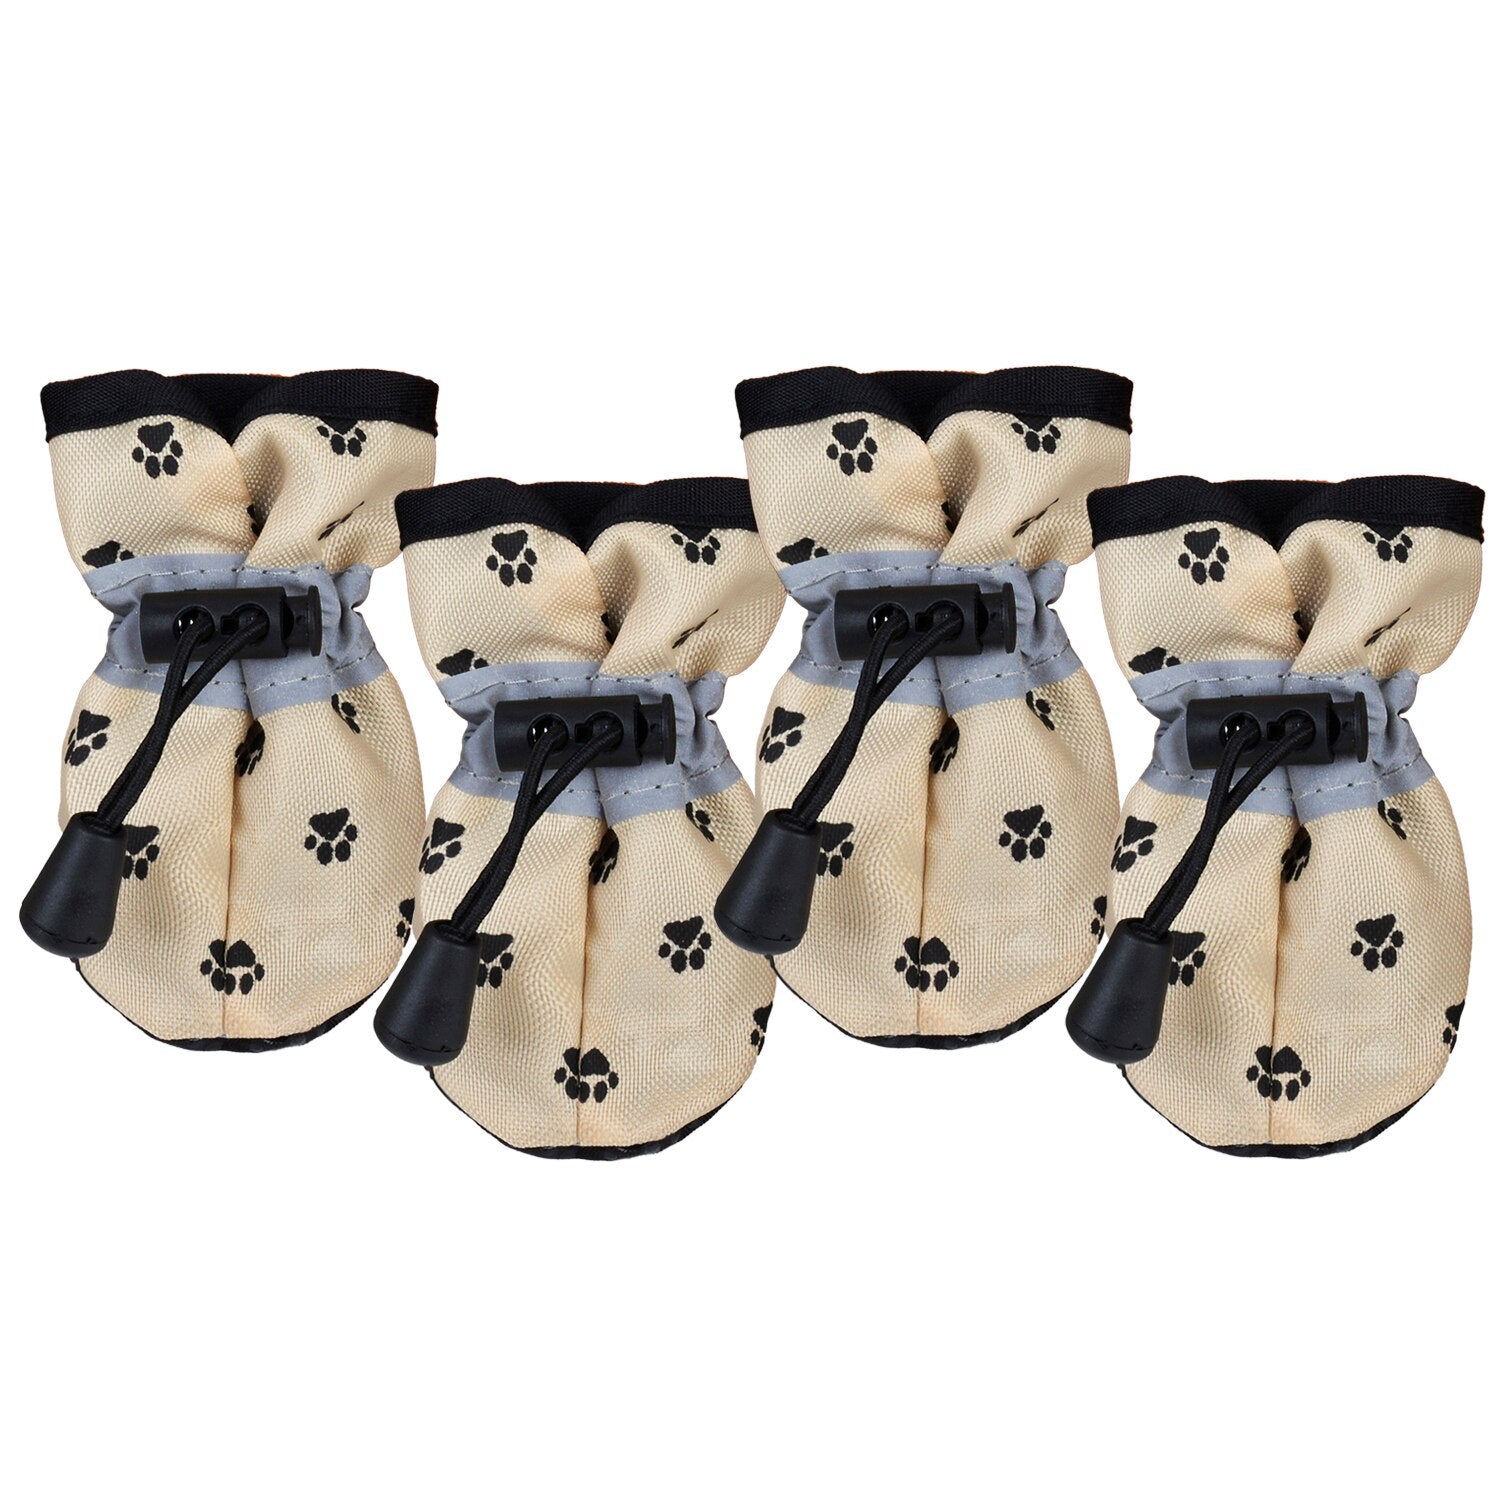 4pcs Winter Pet Dog Shoes Waterproof Anti-Slip Boots Footwear Warm For Small Cats Dogs Puppy Dog Socks Booties-ebowsos